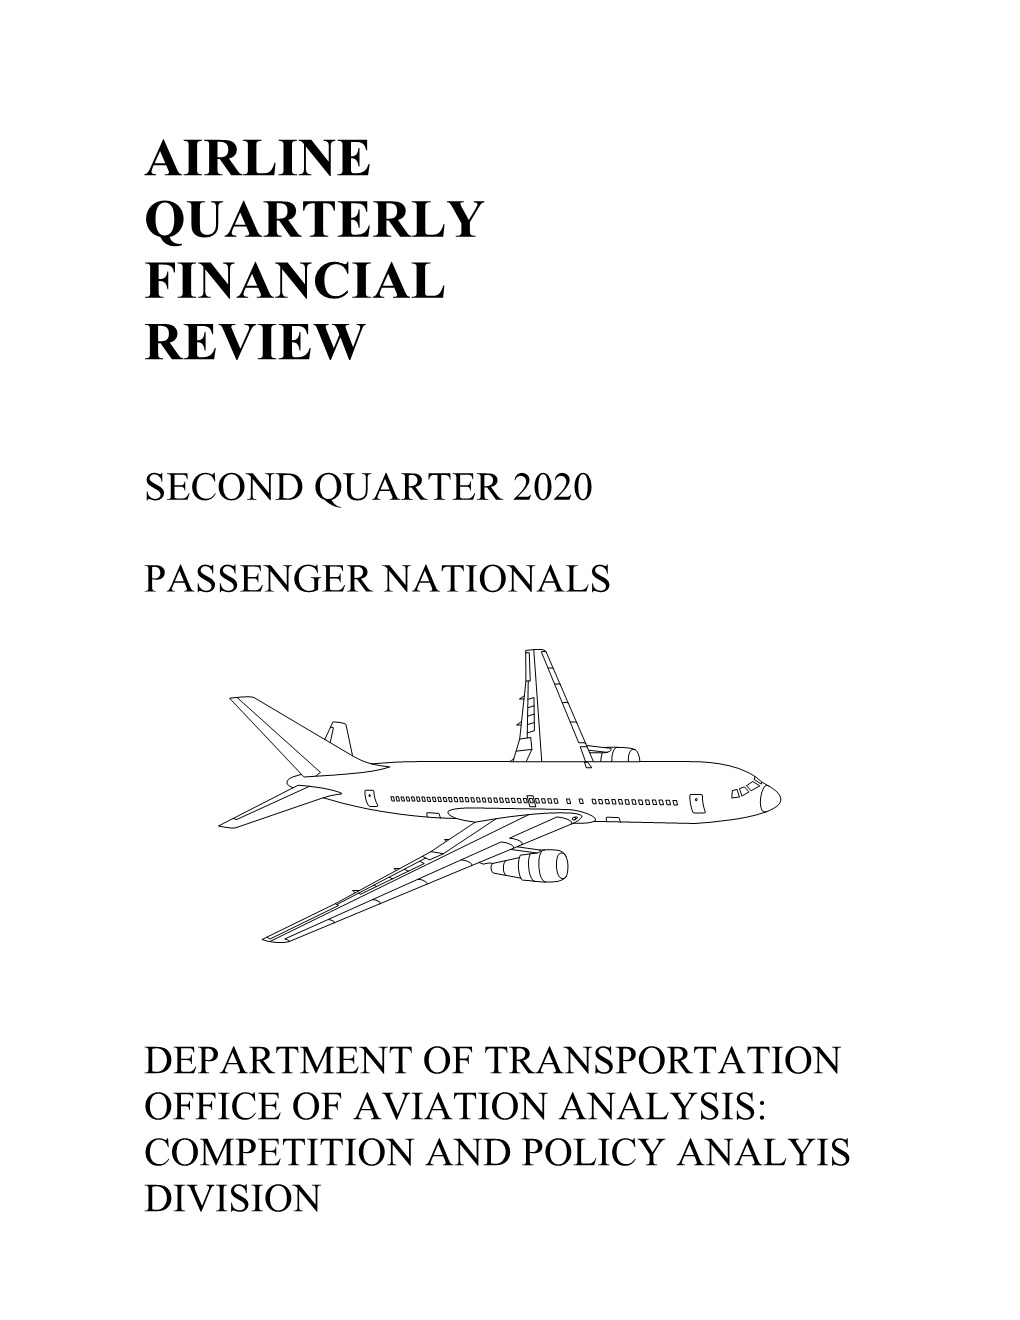 Airline Quarterly Financial Review